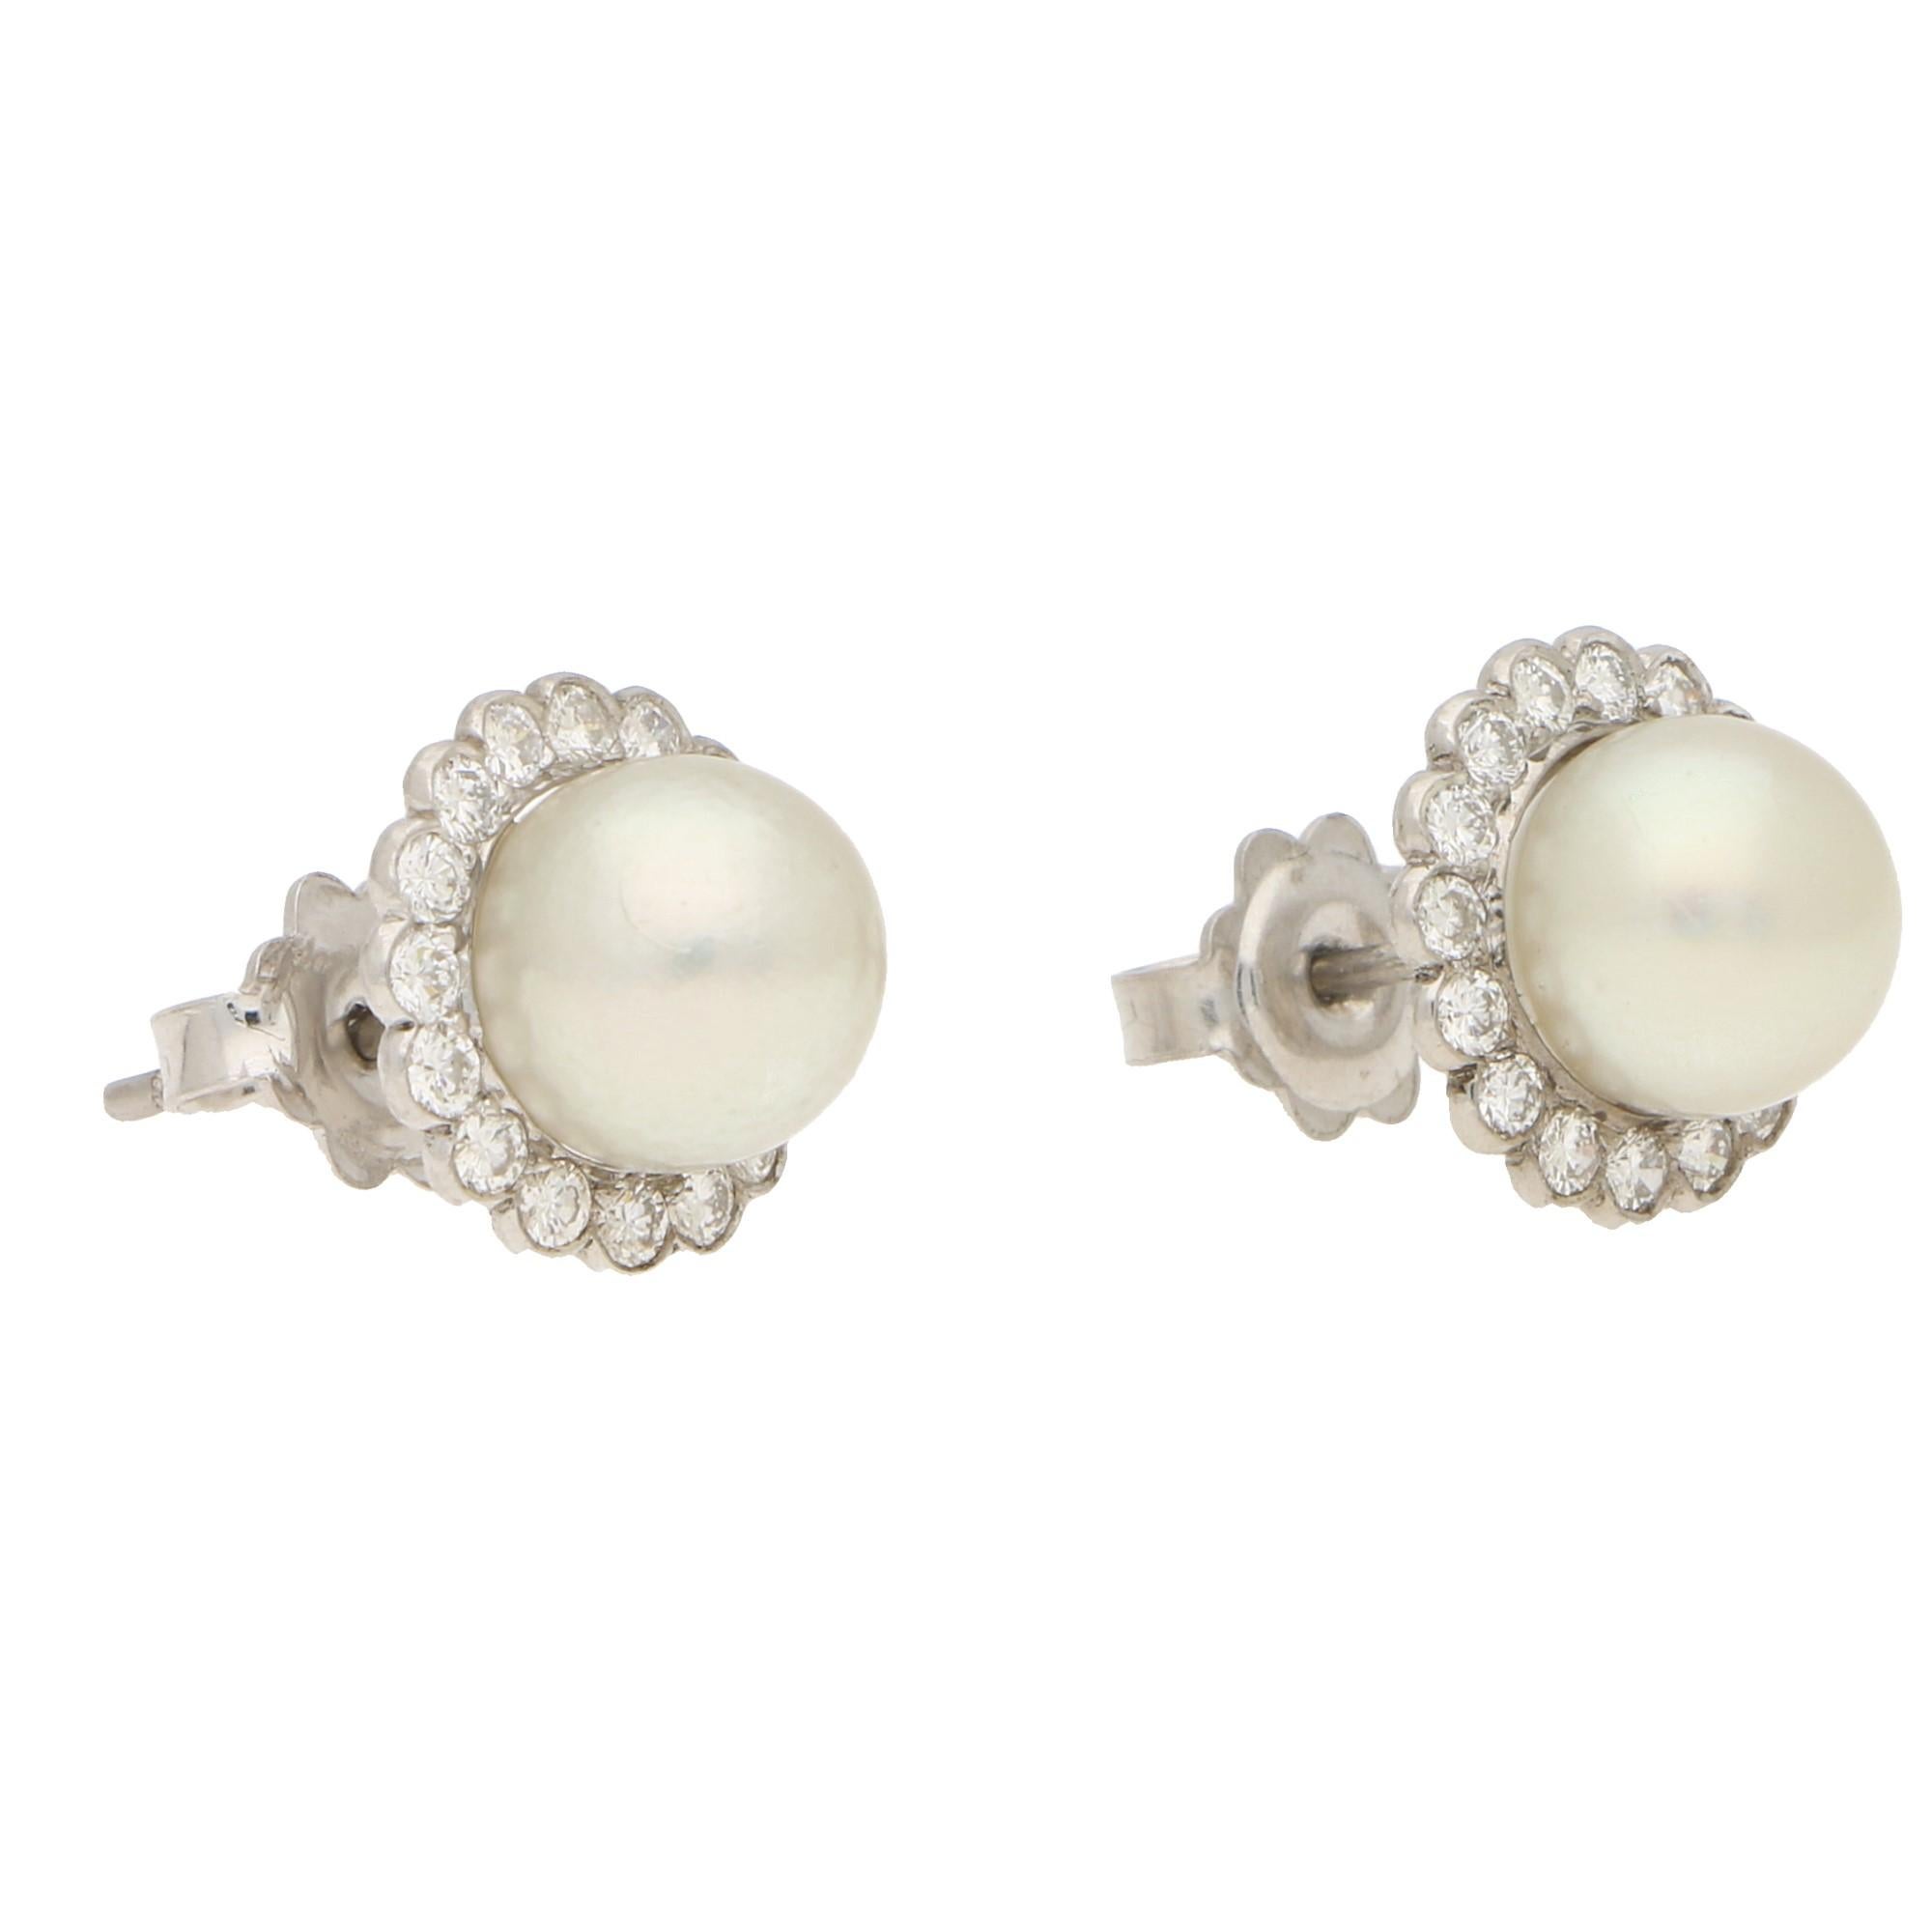 A beautiful little pair of cultured pearl and diamond cluster stud earrings set in 18k white gold. Each earring is centrally set with a lovely 6mm cultured pearl surrounded by 16 sparkly round brilliant cut diamonds. 

The earrings measure exactly